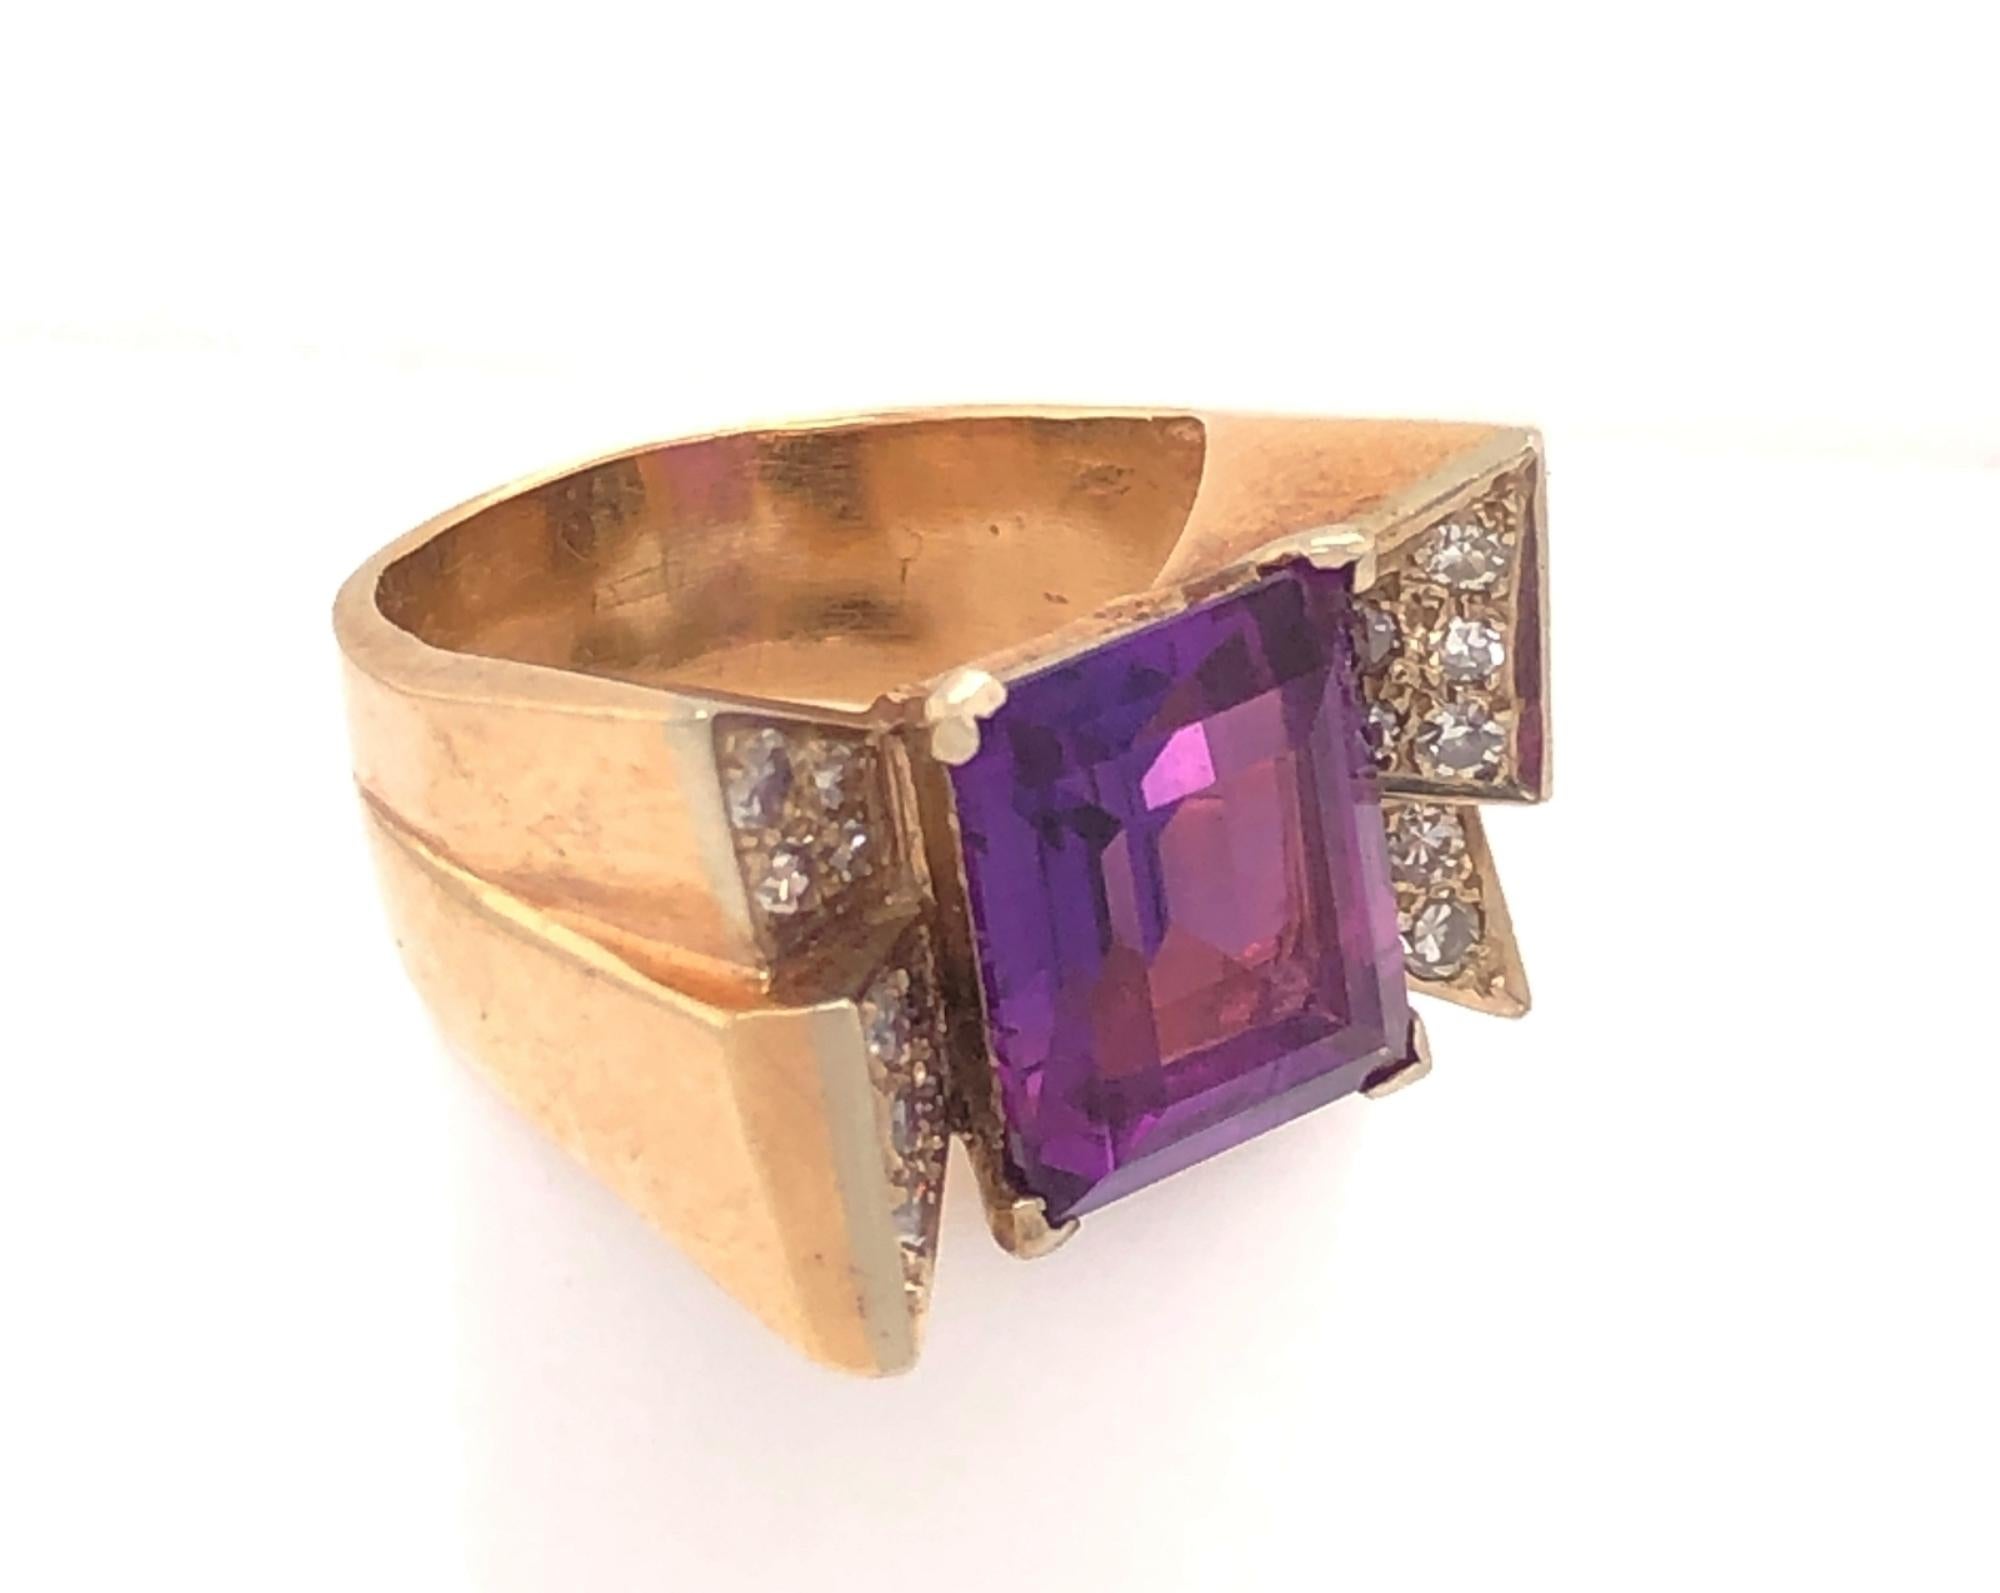 Vintage Retro Bow Design Amethyst Diamond 14K Yellow Gold Ring. This is a beautiful vintage retro bow design ring c.1940. The ring is set with a natural amethyst and 18 round diamonds. The amethyst has amazing color and clarity estimated weight 6